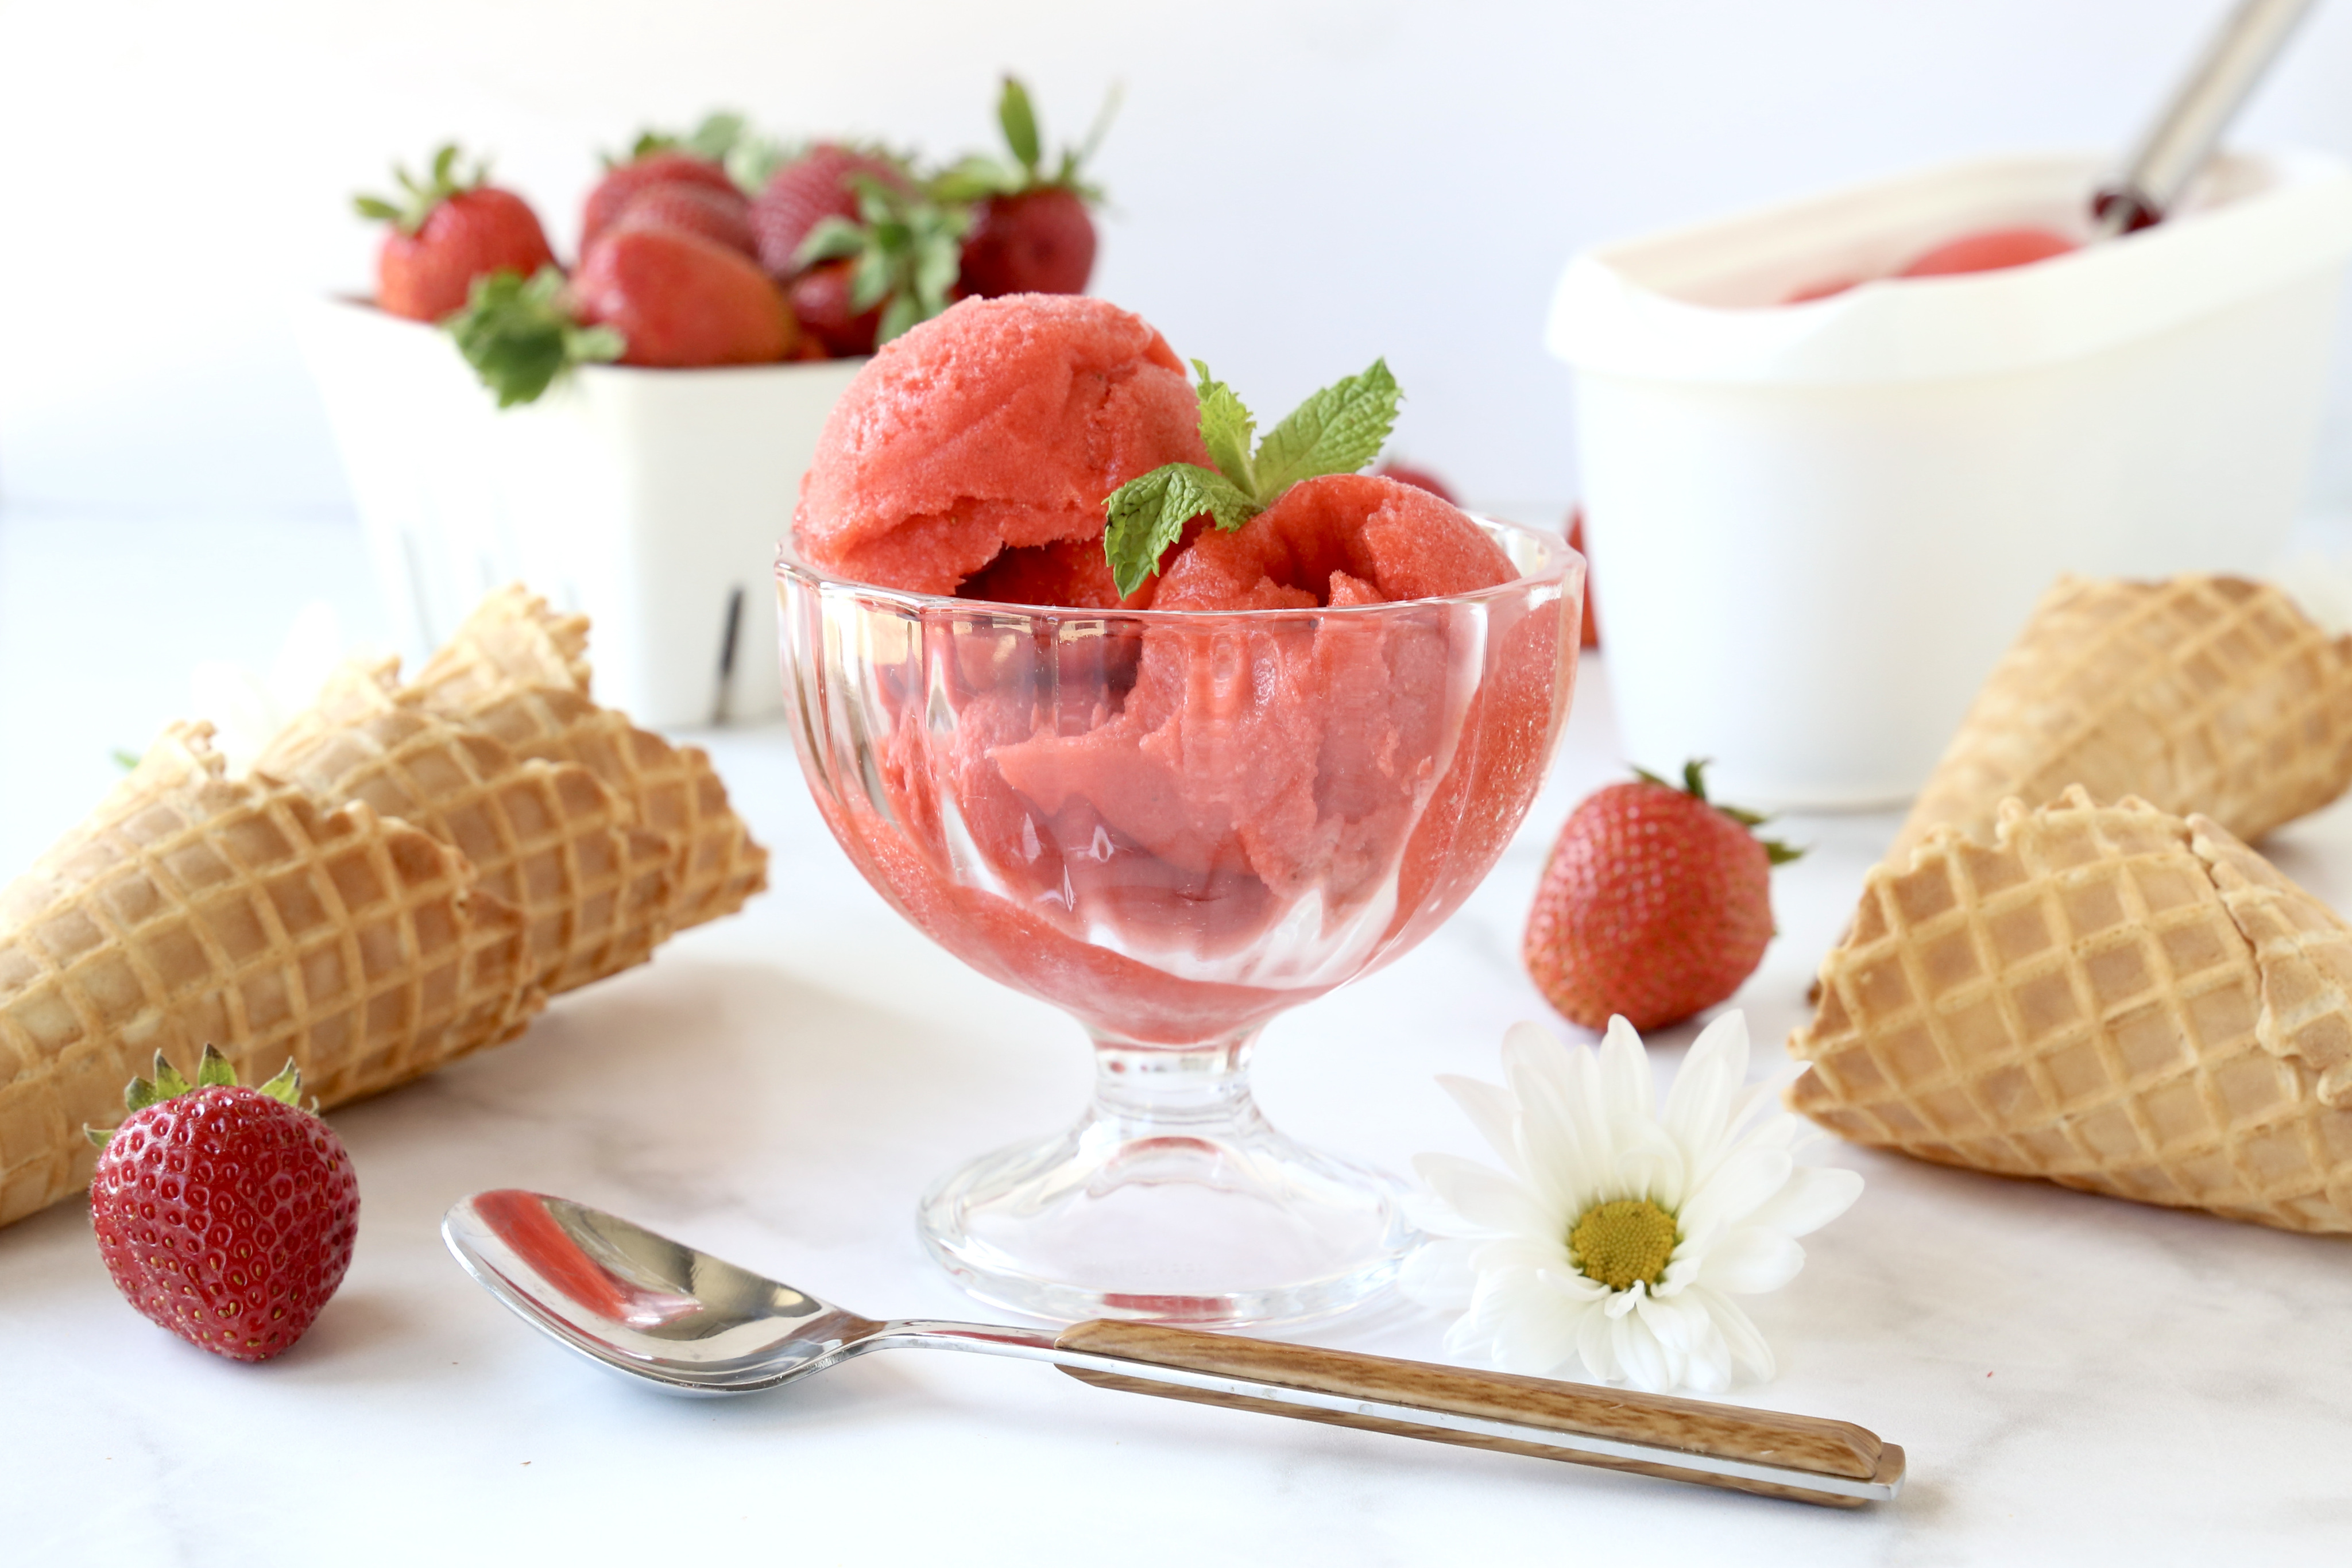 Berry delicious: Celebrate summer with special sponge cake and sorbet  recipes